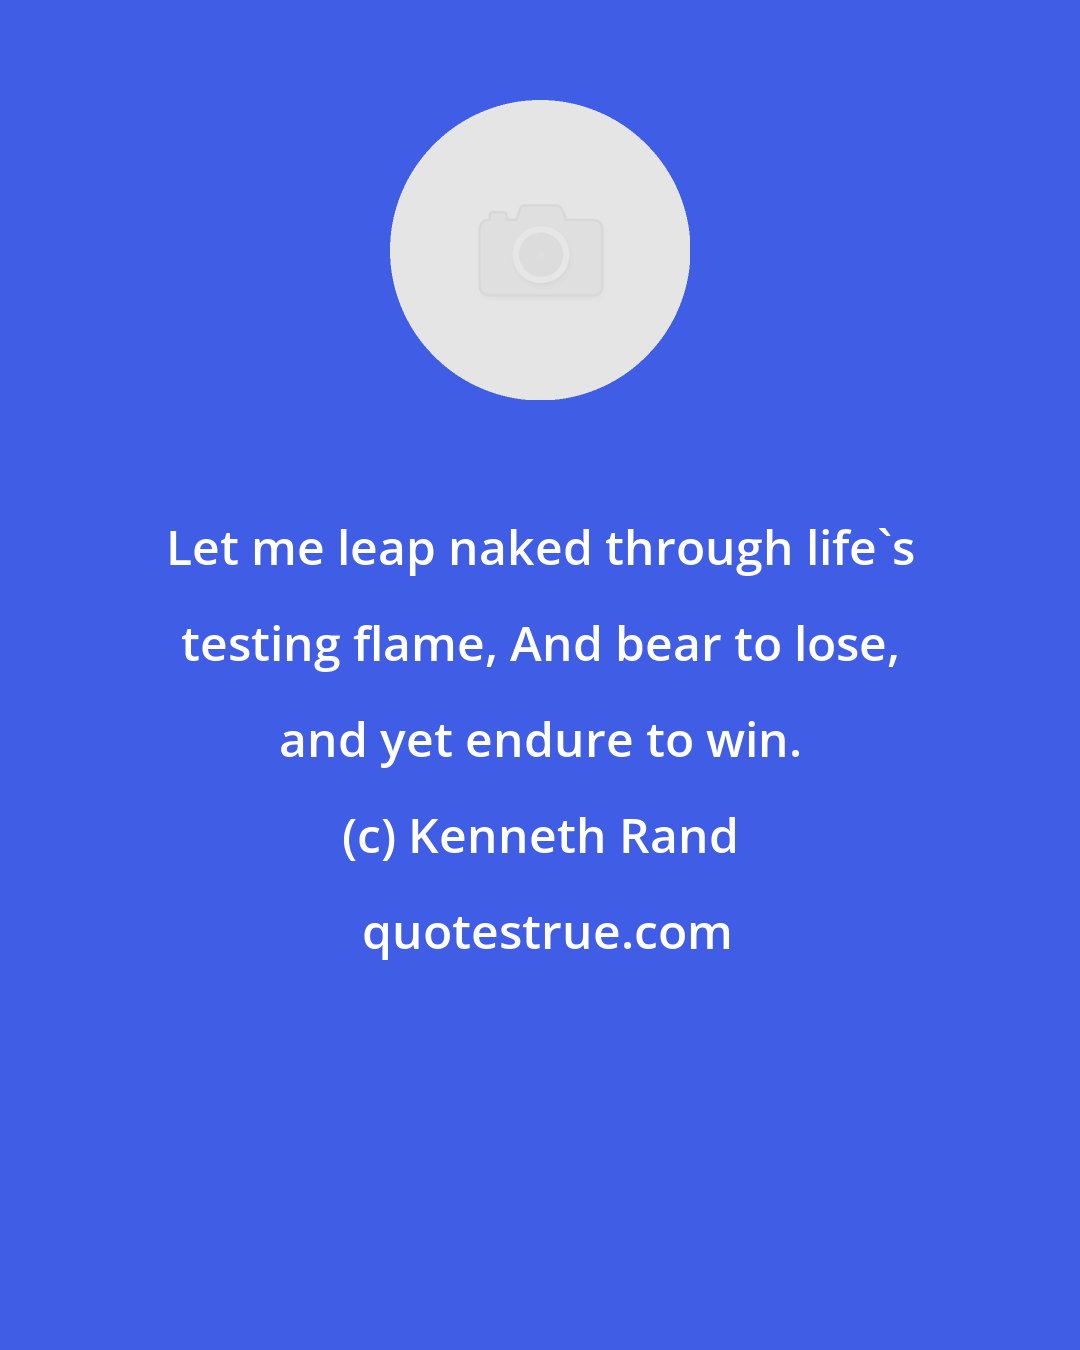 Kenneth Rand: Let me leap naked through life's testing flame, And bear to lose, and yet endure to win.